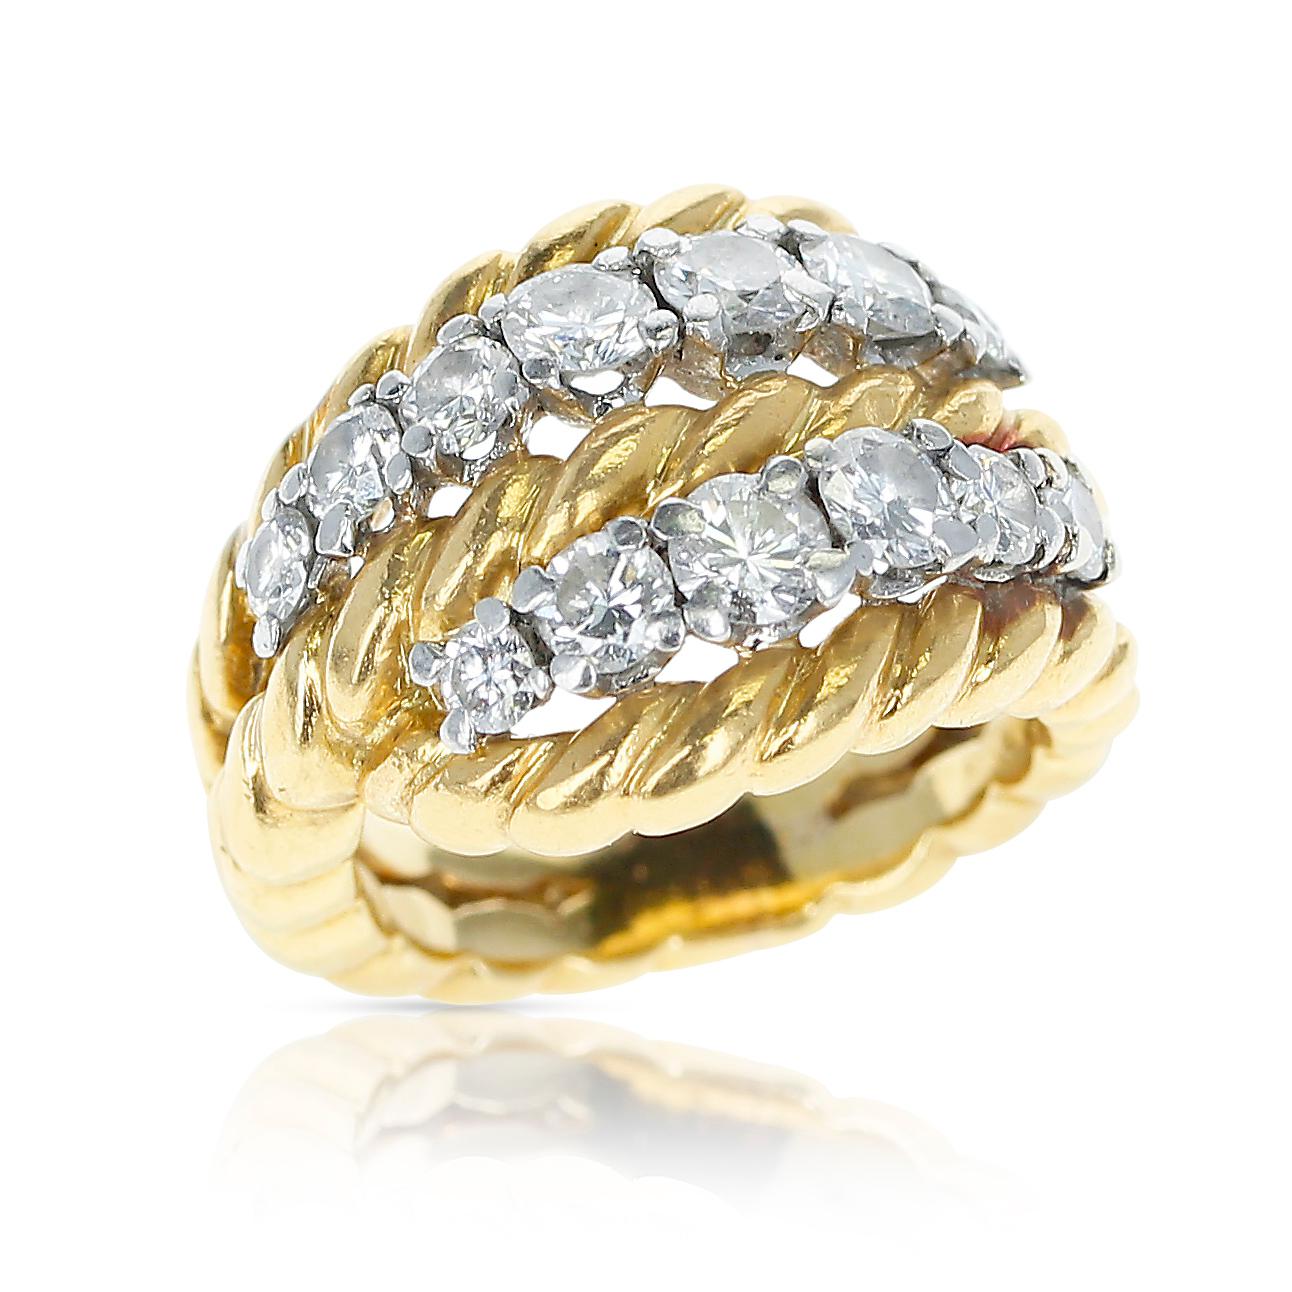 A Van Cleef & Arpels Two Row Diamonds and Twisted Rope Gold Ring made in 18 Karat Yellow Gold. Stamped VCA and Made in France. Ring Size US 3. 
Total Weight: 9.93 grams. 


